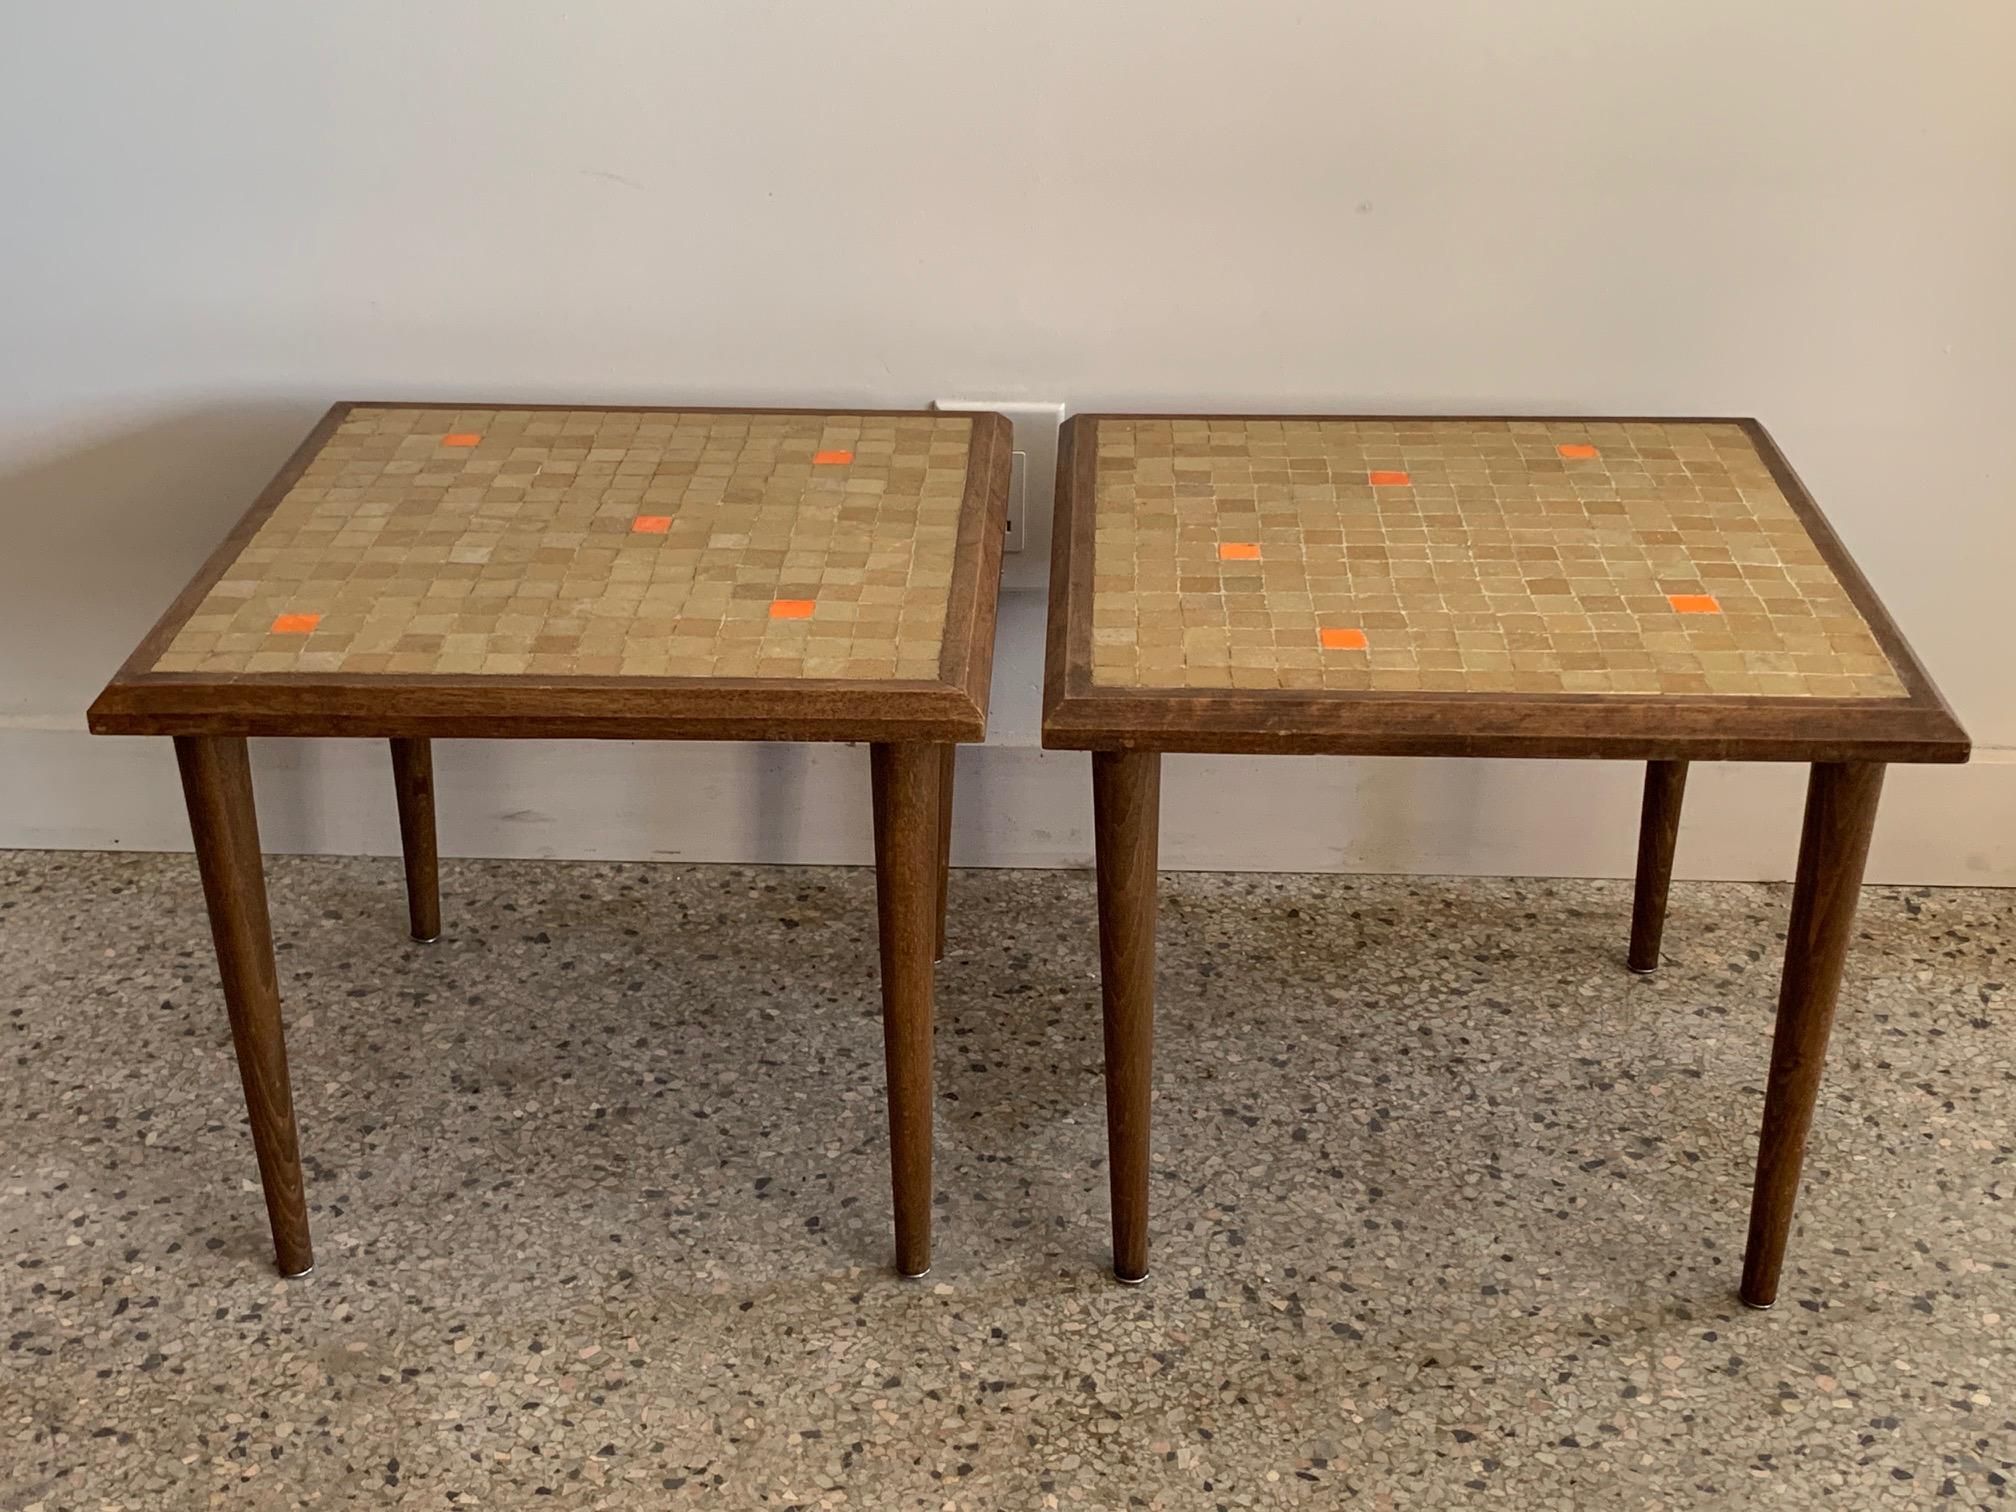 A pair of charming side tables with Murano tiles, set in random pattern.